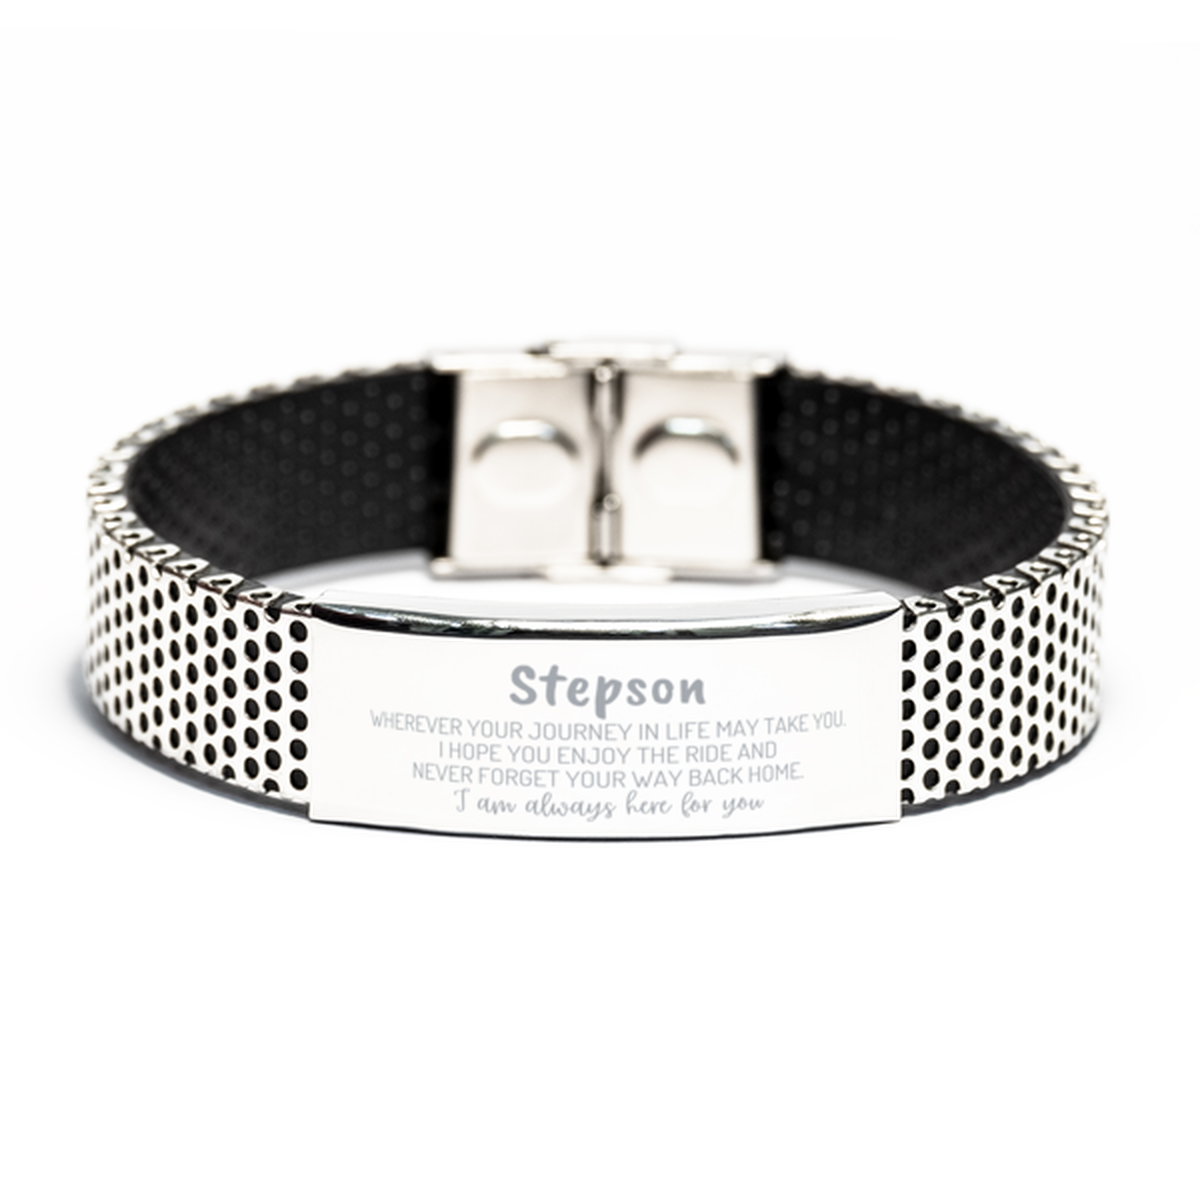 Stepson wherever your journey in life may take you, I am always here for you Stepson Stainless Steel Bracelet, Awesome Christmas Gifts For Stepson, Stepson Birthday Gifts for Men Women Family Loved One